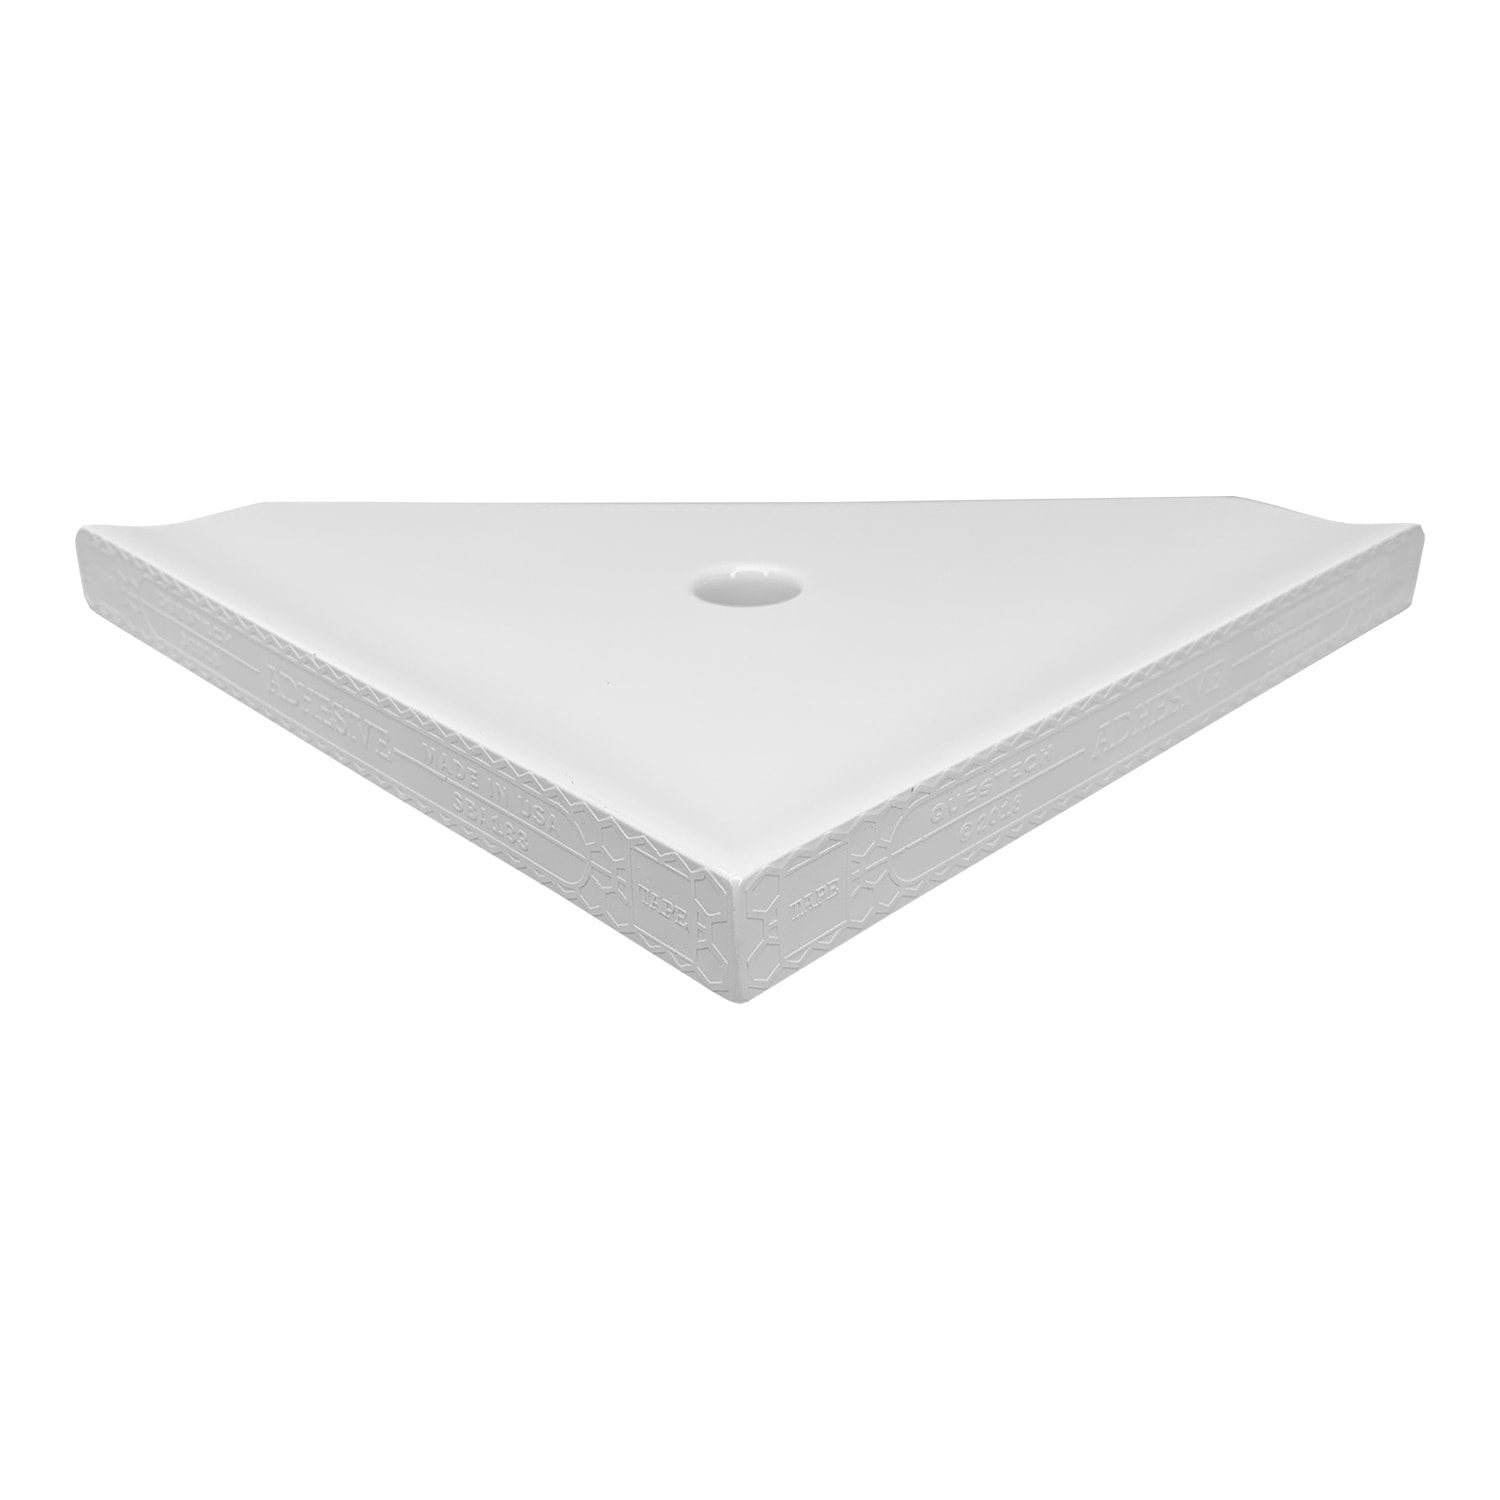 8 Polished Light Gray Ceramic Corner Shelf Elegant Shower Shelf With a  Drain Hole two Sided Tapes Included 